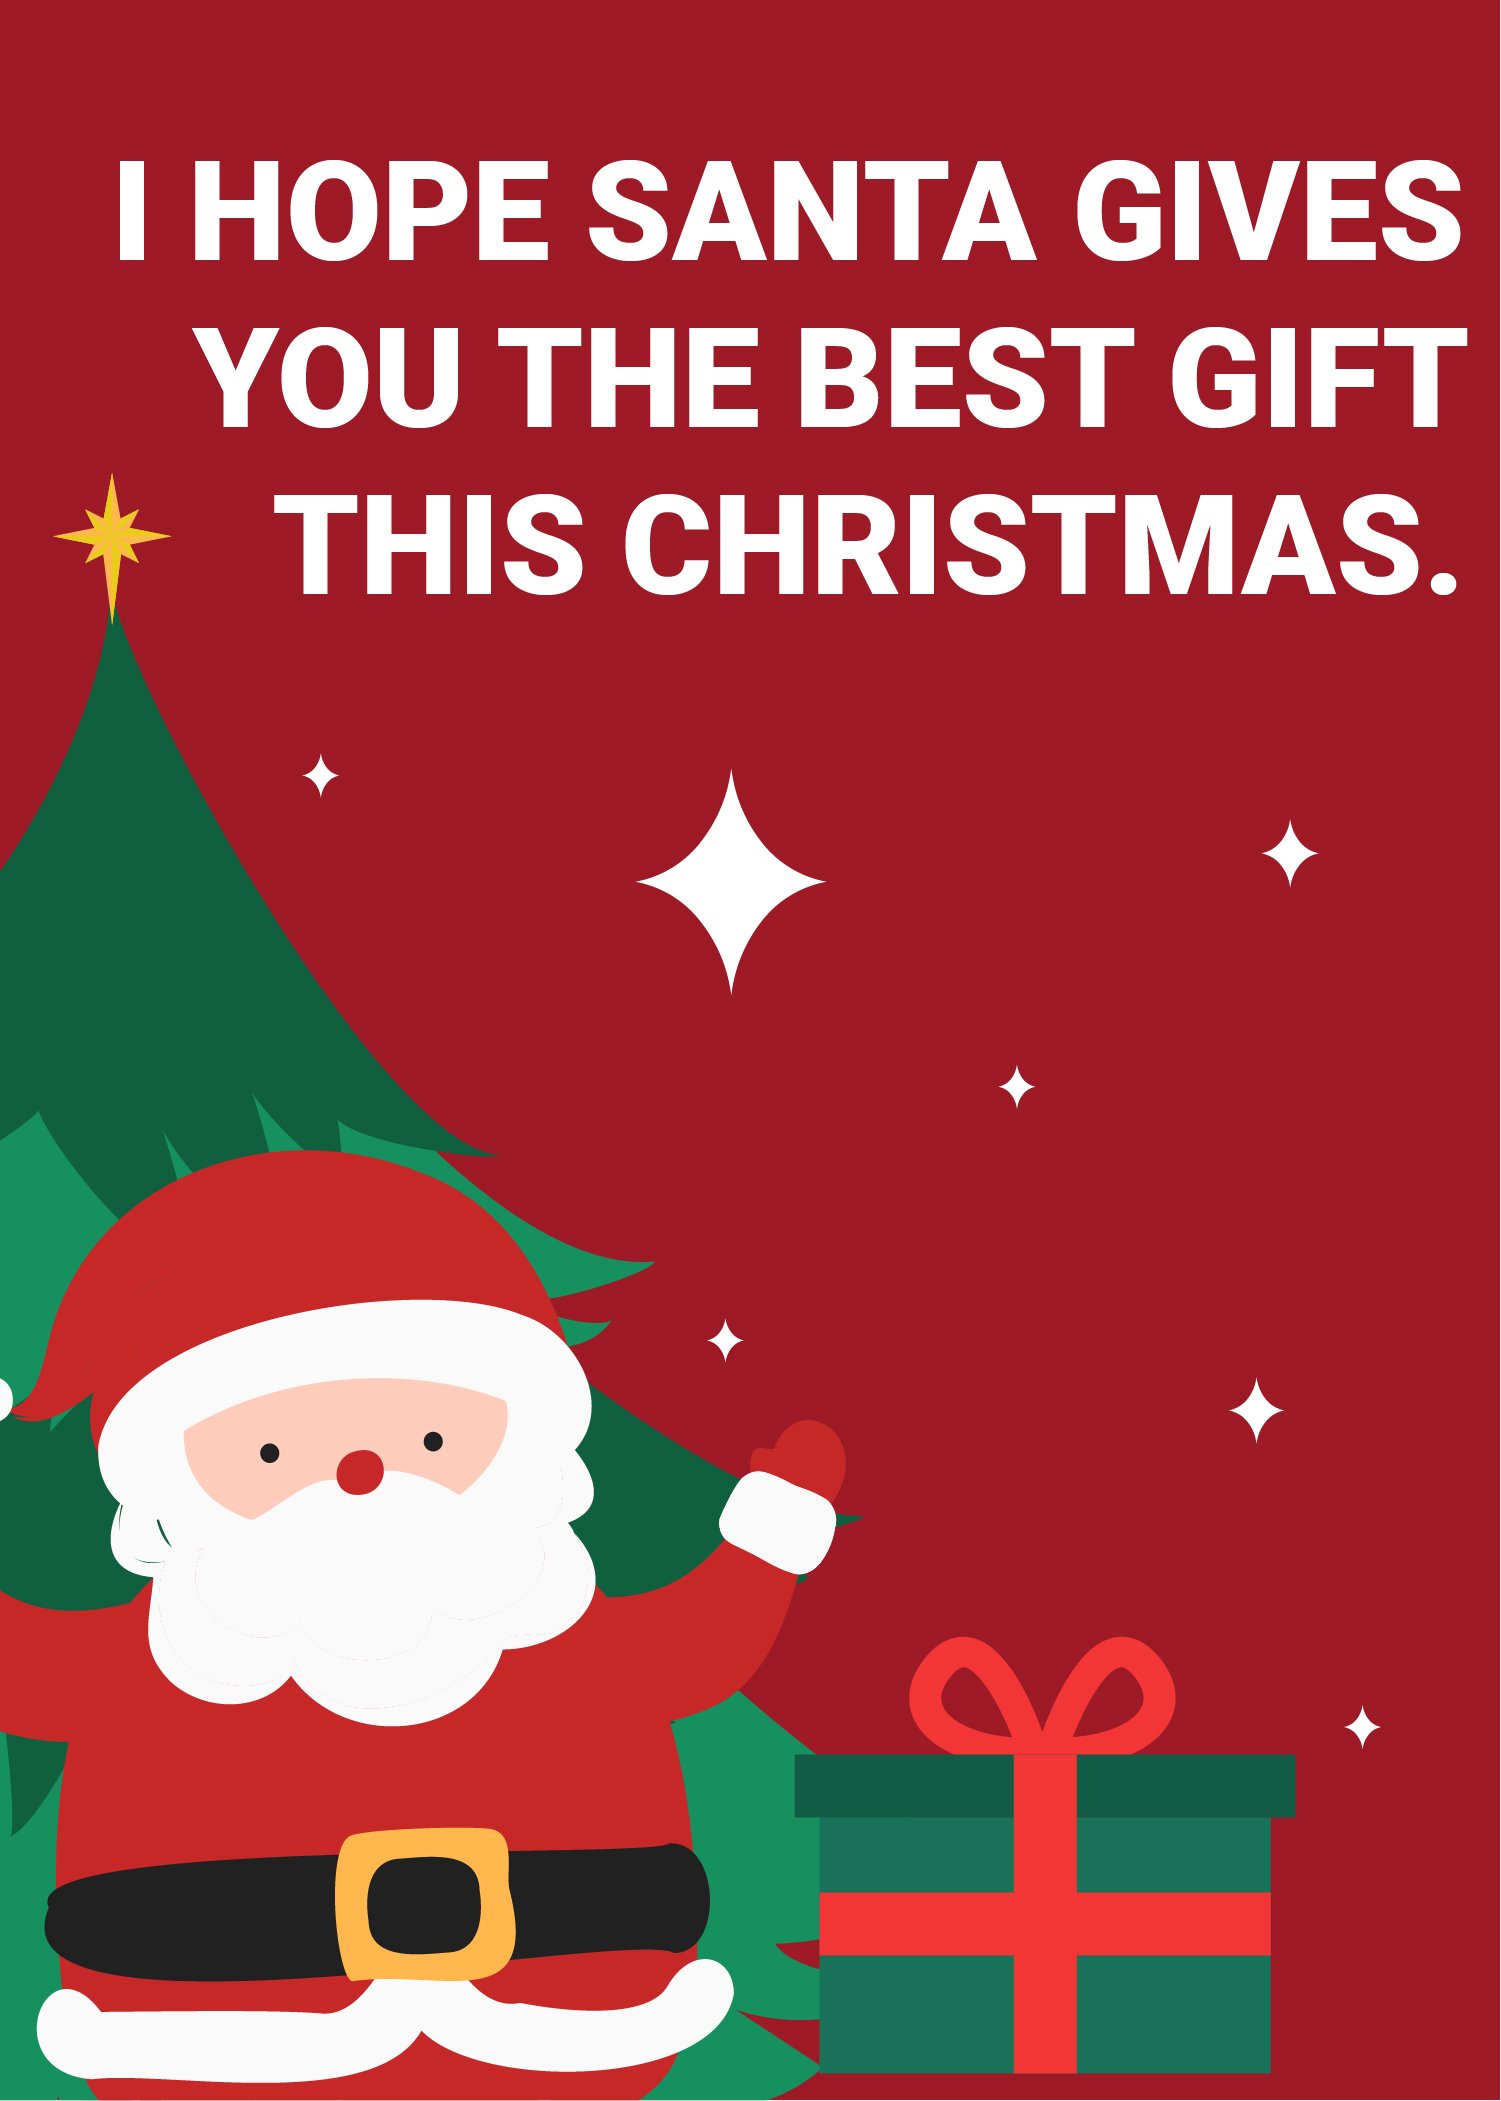 Free Christmas Best Wishes in Word, Google Docs, Illustrator, PSD, Apple Pages, Publisher, EPS, SVG, JPG, PNG